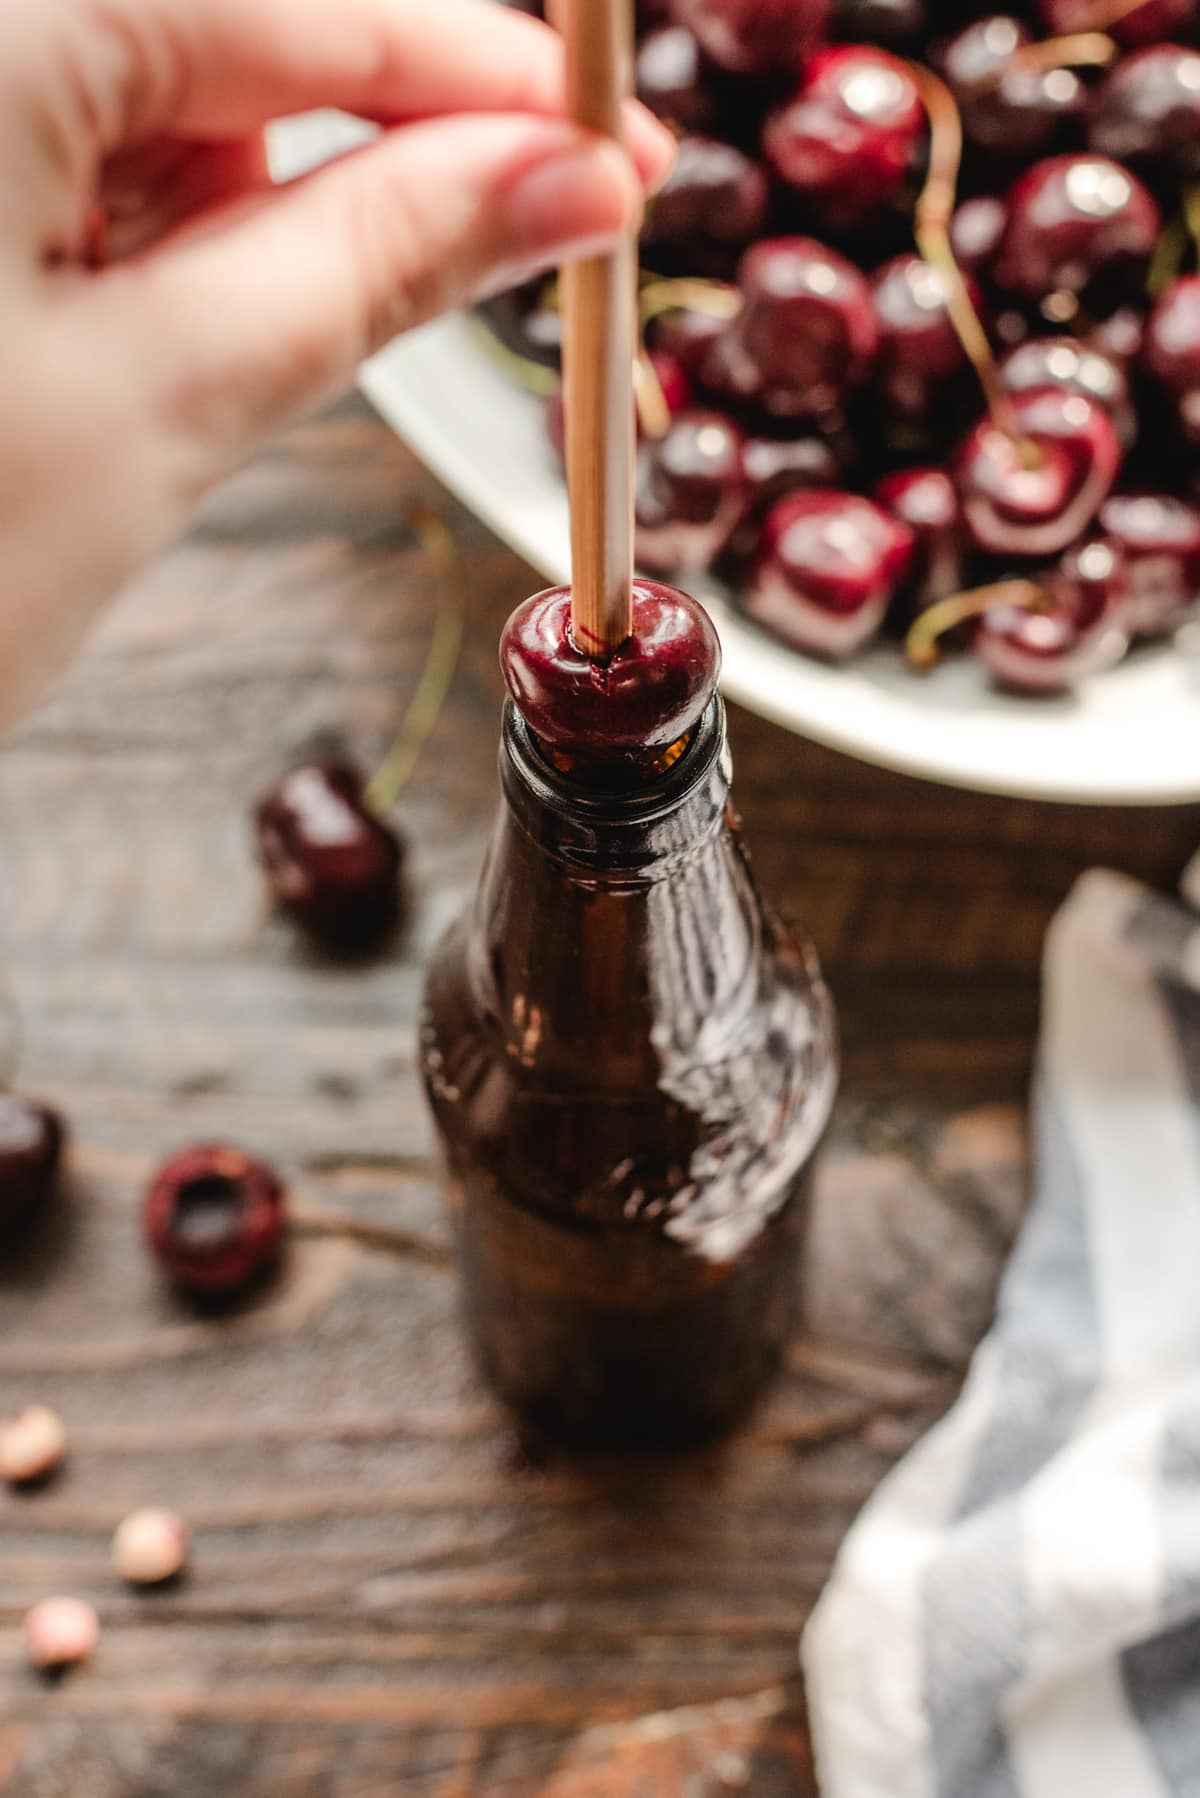 A chopstick being pushed into the center of a cherry which is placed over an empty beer bottle.